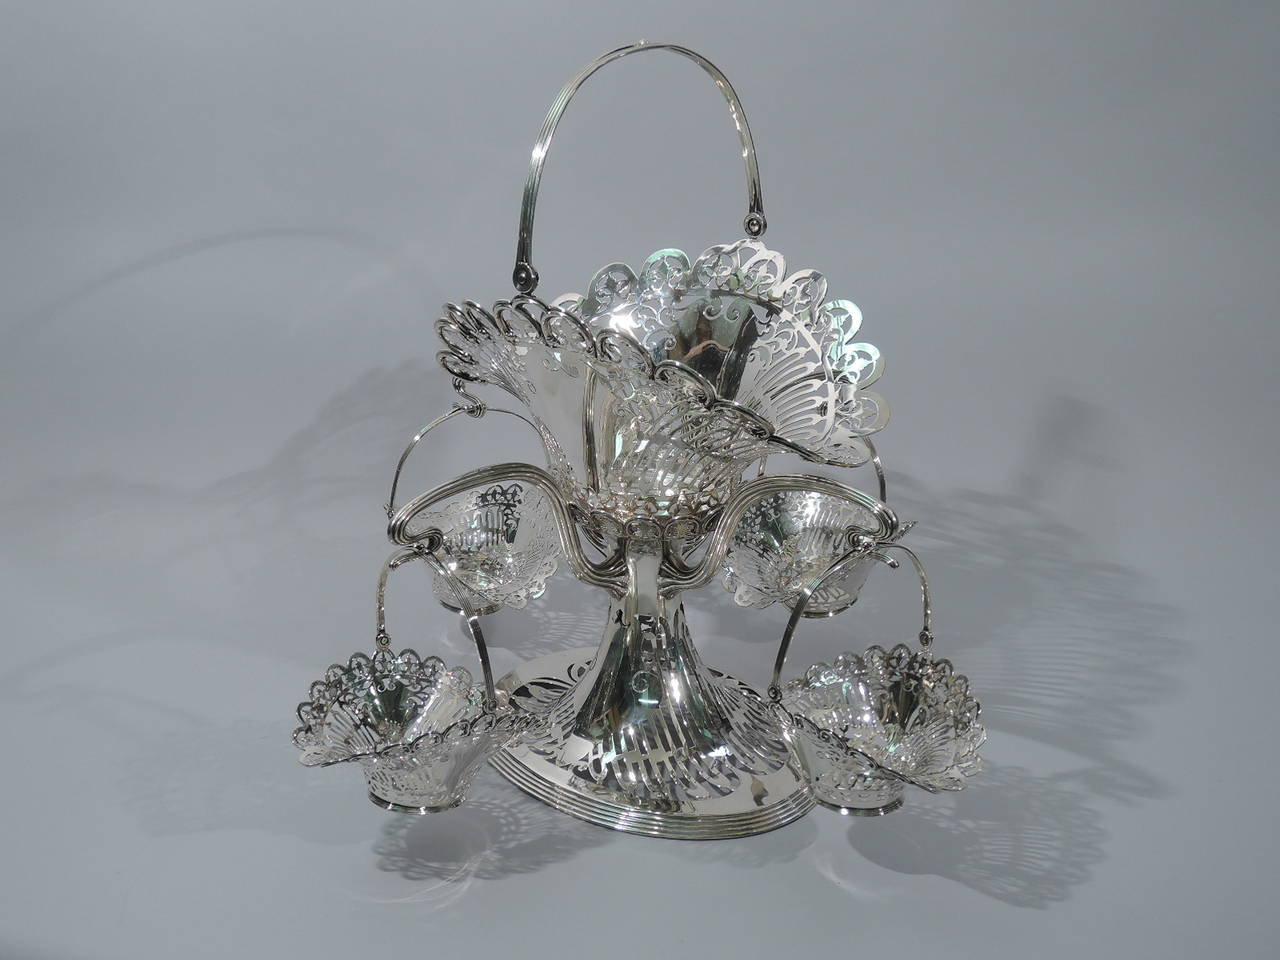 Beautiful sterling silver basket epergne. Made by Frank W. Smith in Gardner, Mass., circa 1910, for Bailey, Banks & Biddle in Philadephia. Raised base supports central basket and four reeded whiplash arms, each supporting same basket in